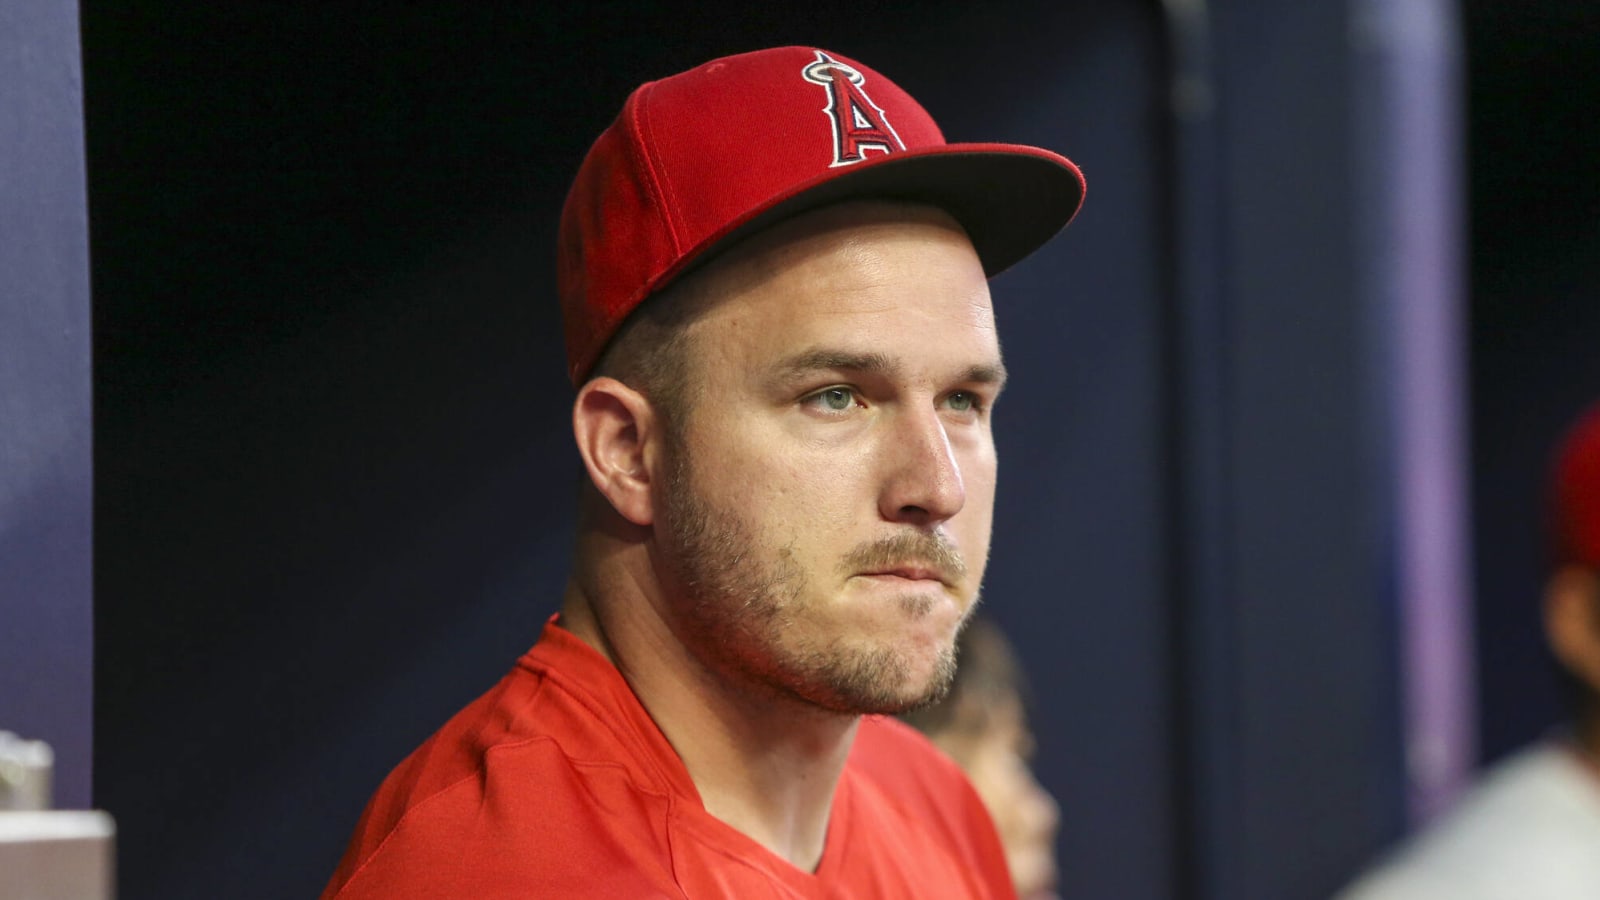 Angels star Mike Trout diagnosed with rare back condition